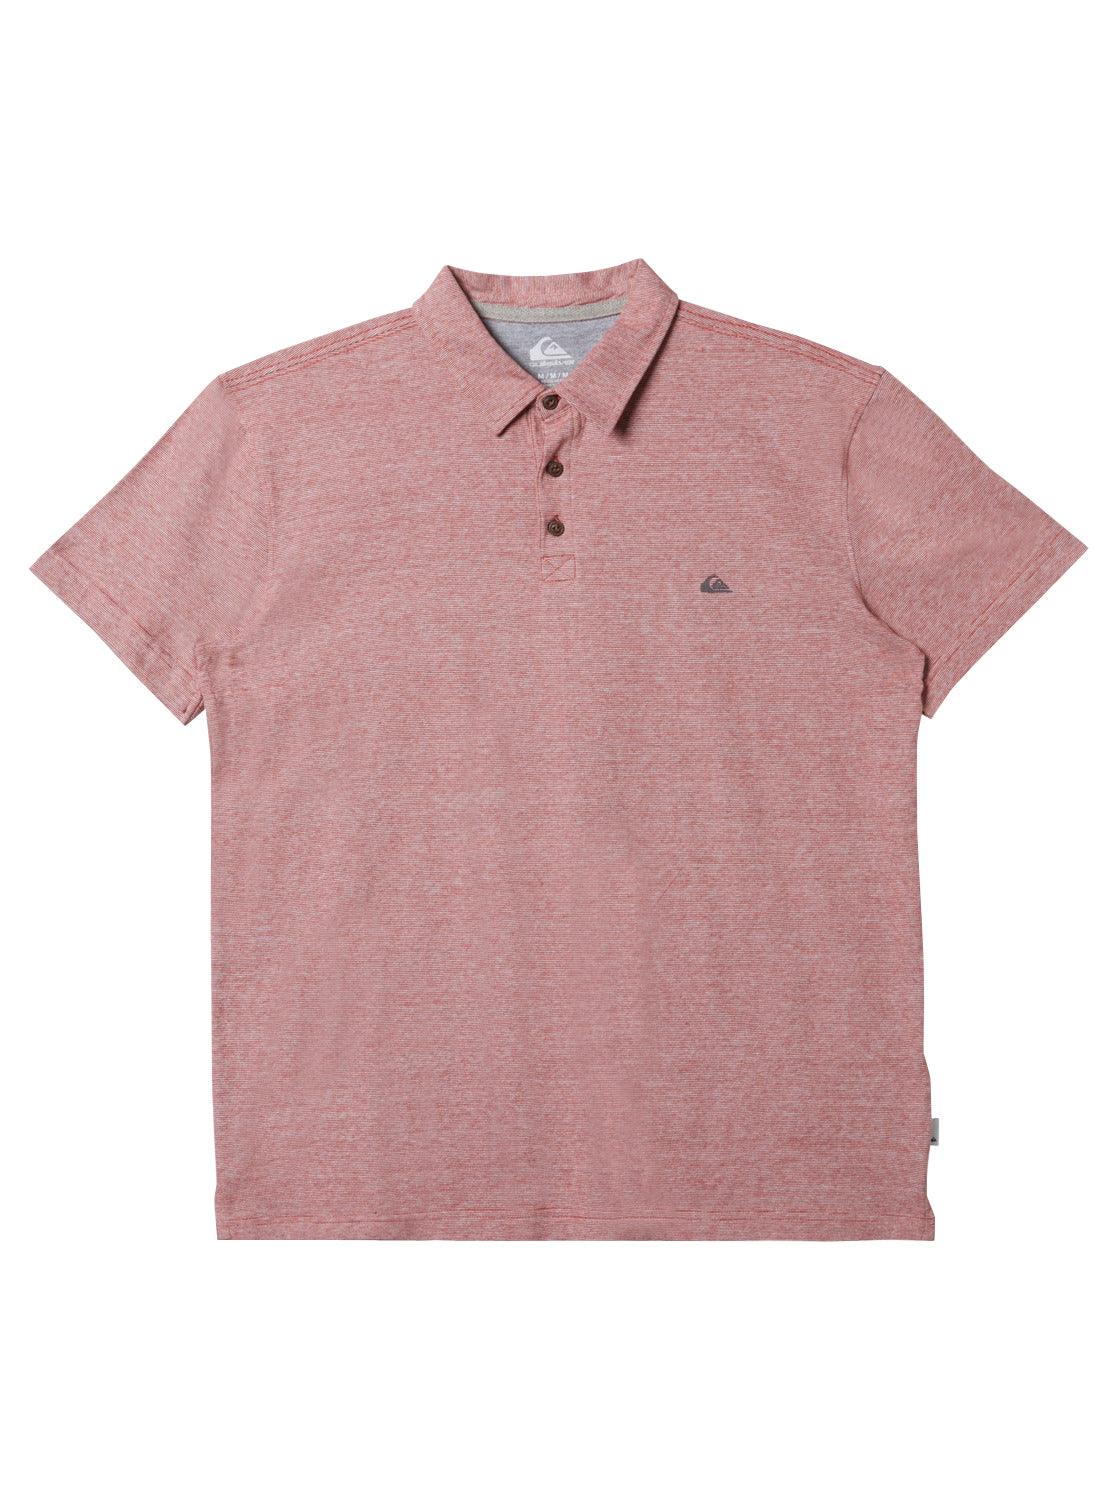 Quiksilver Sunset Cruise SS Polo RQS0 M